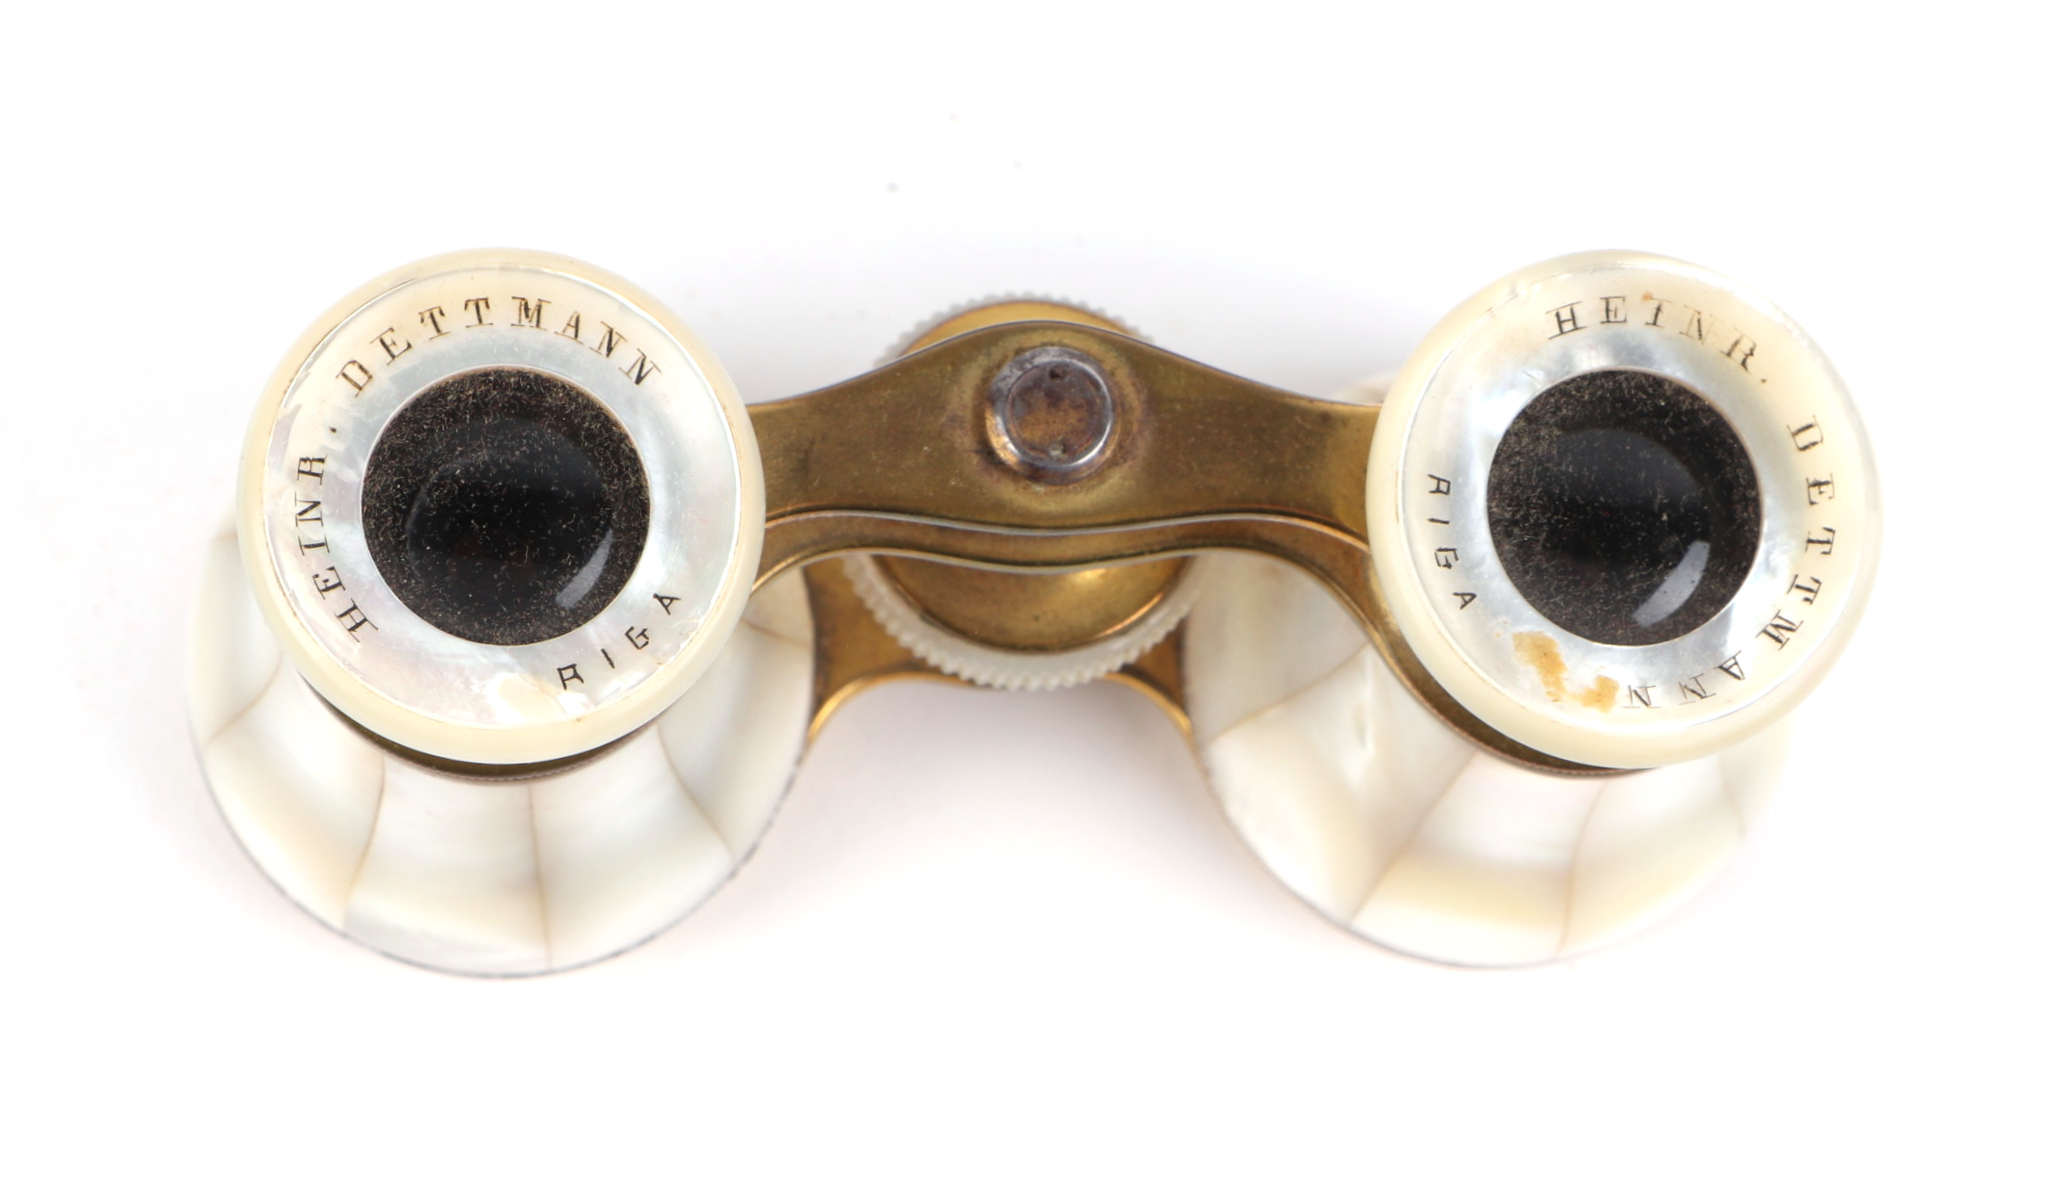 A pair of mother of pearl Heinr Dettmann opera glasses. - Image 4 of 4